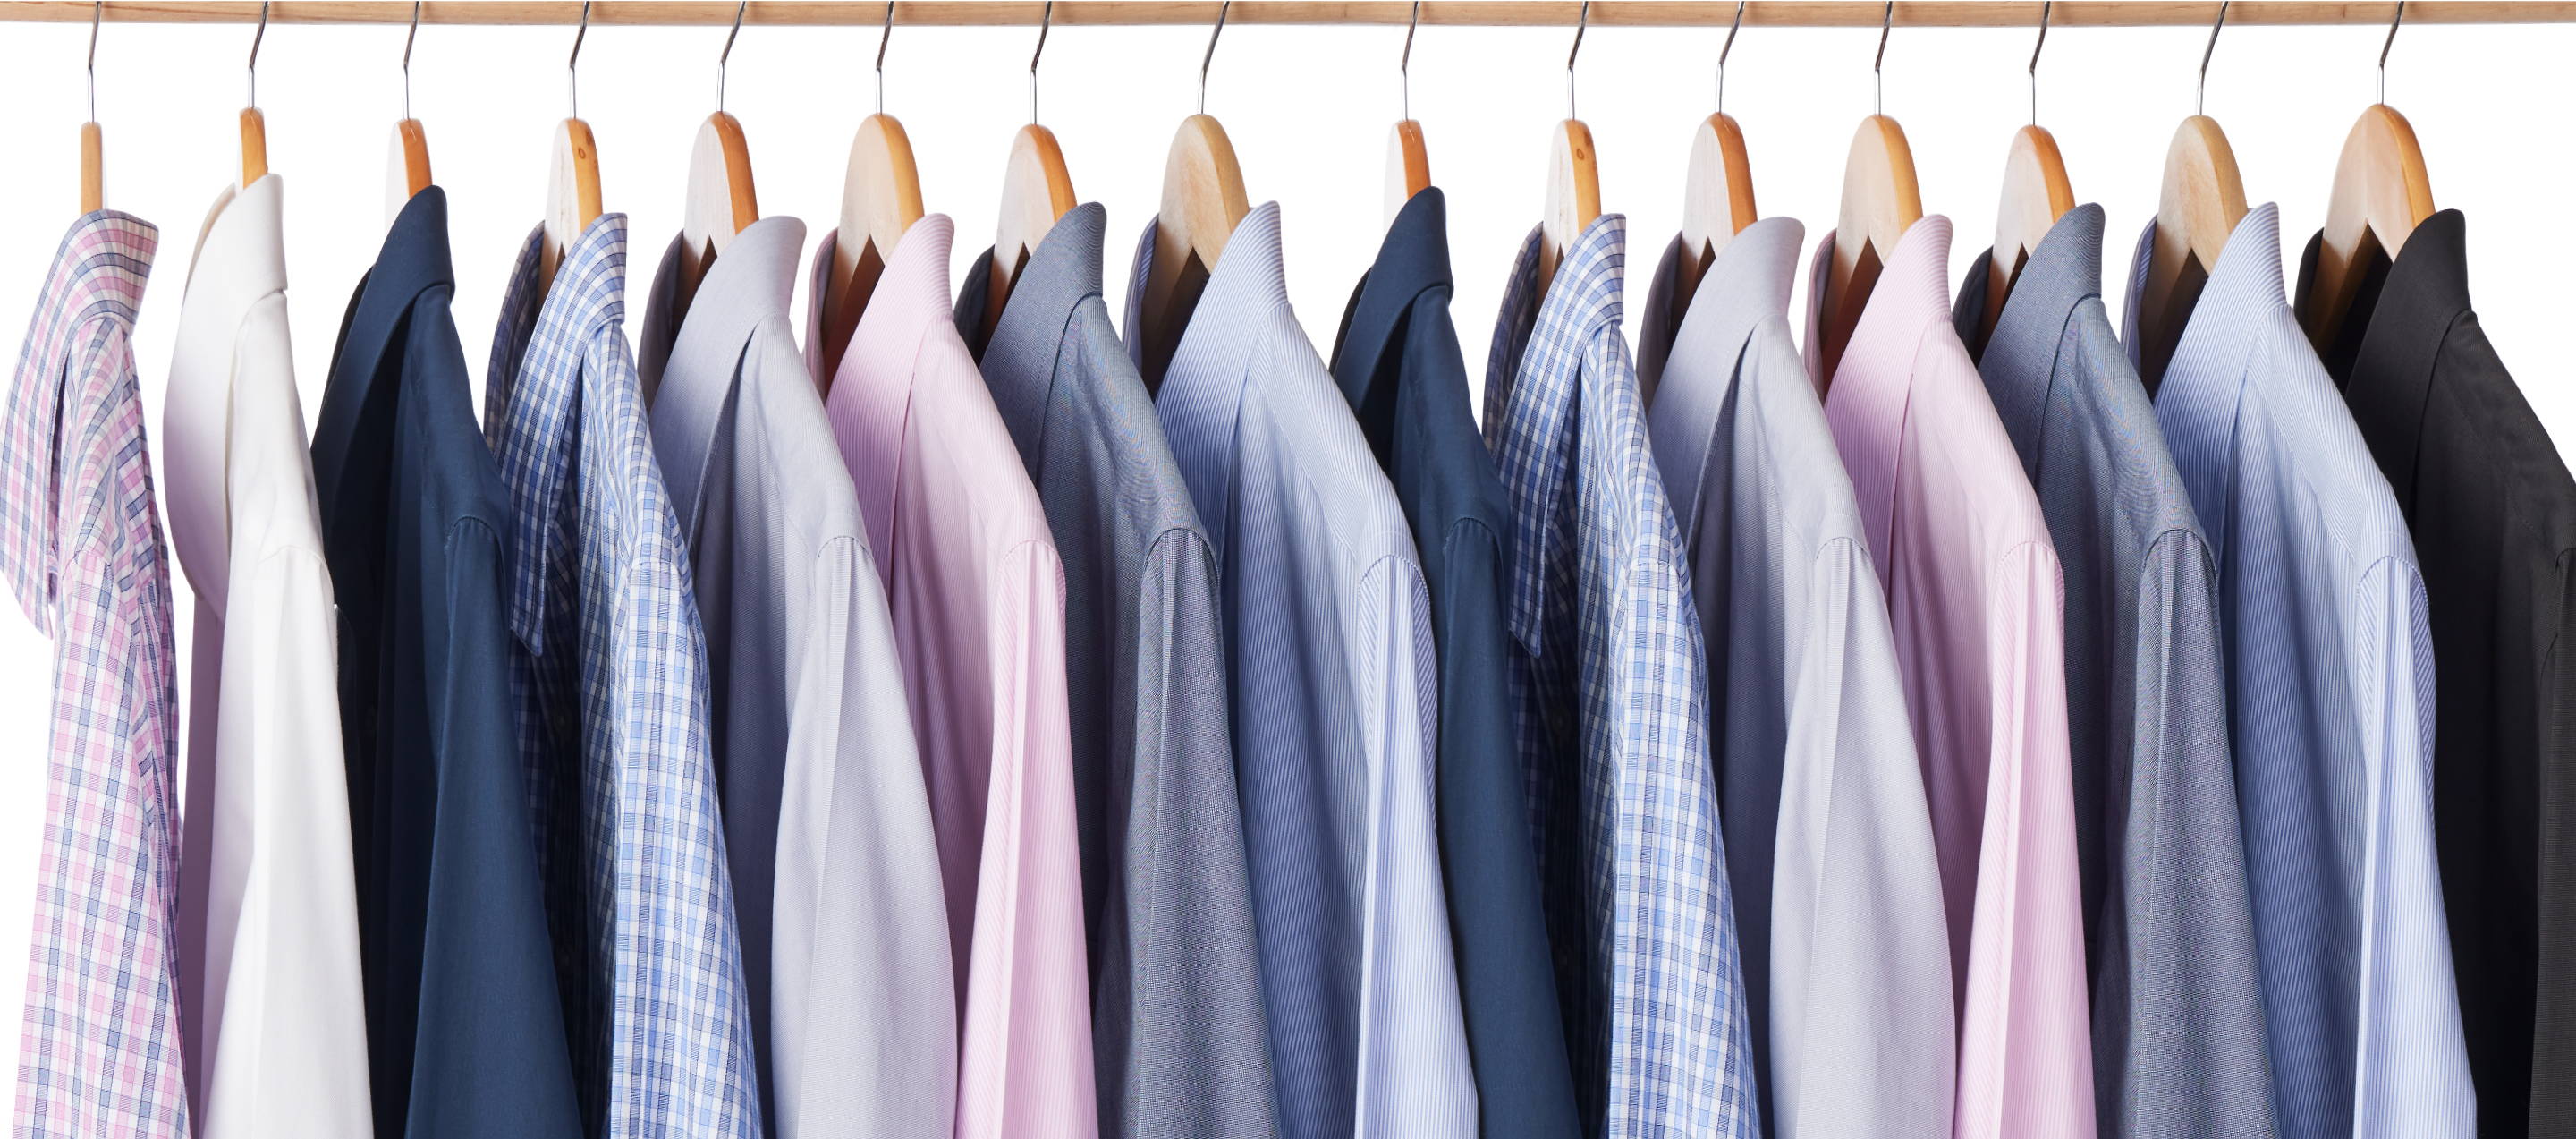 UNTUCKit shirts on a clothes rack